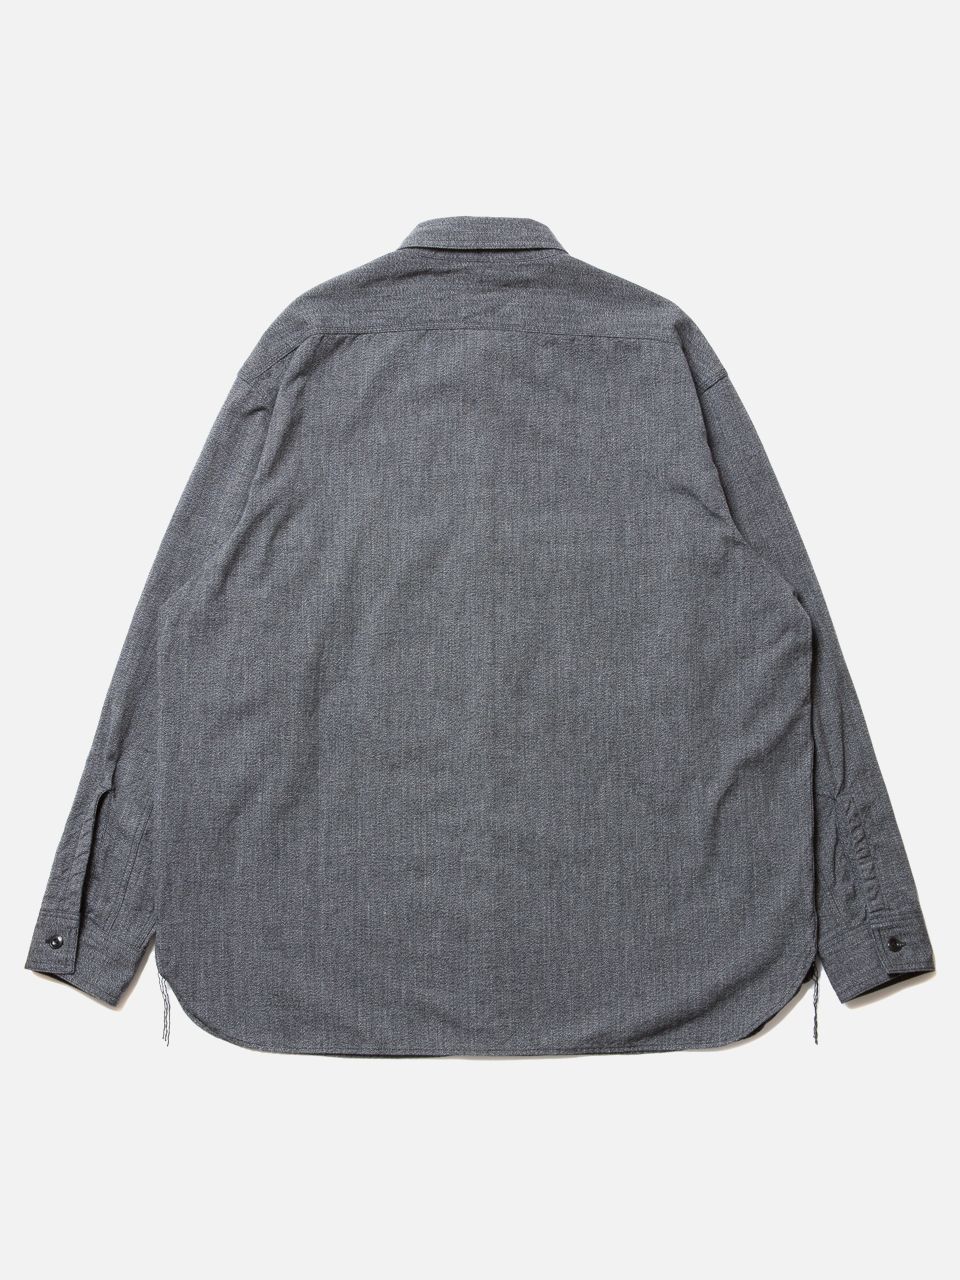 COOTIE クーティ 通販 18SS シャツ Chambray L/S Work Shirt